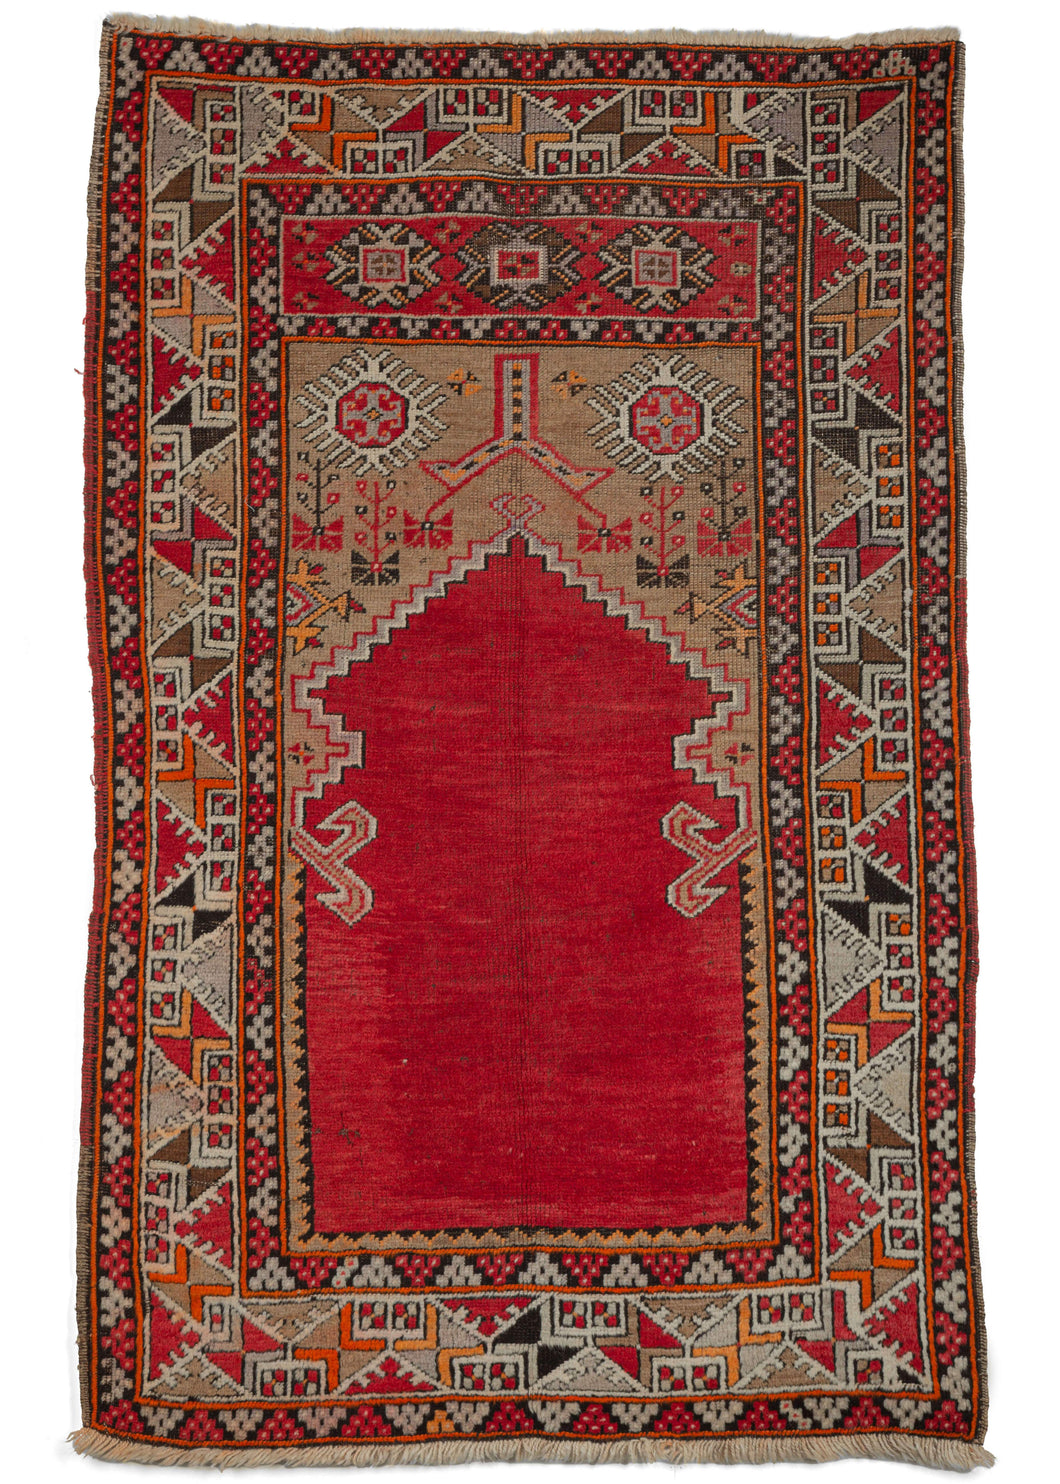 Antique Turkish Karaman prayer rug featuring a bright red mihrab (prayer niche) on a camel ground. The largely geometric details are rendered in brown, purple, orange, yellow, and black, with the tricolor selvedge bringing it all together.